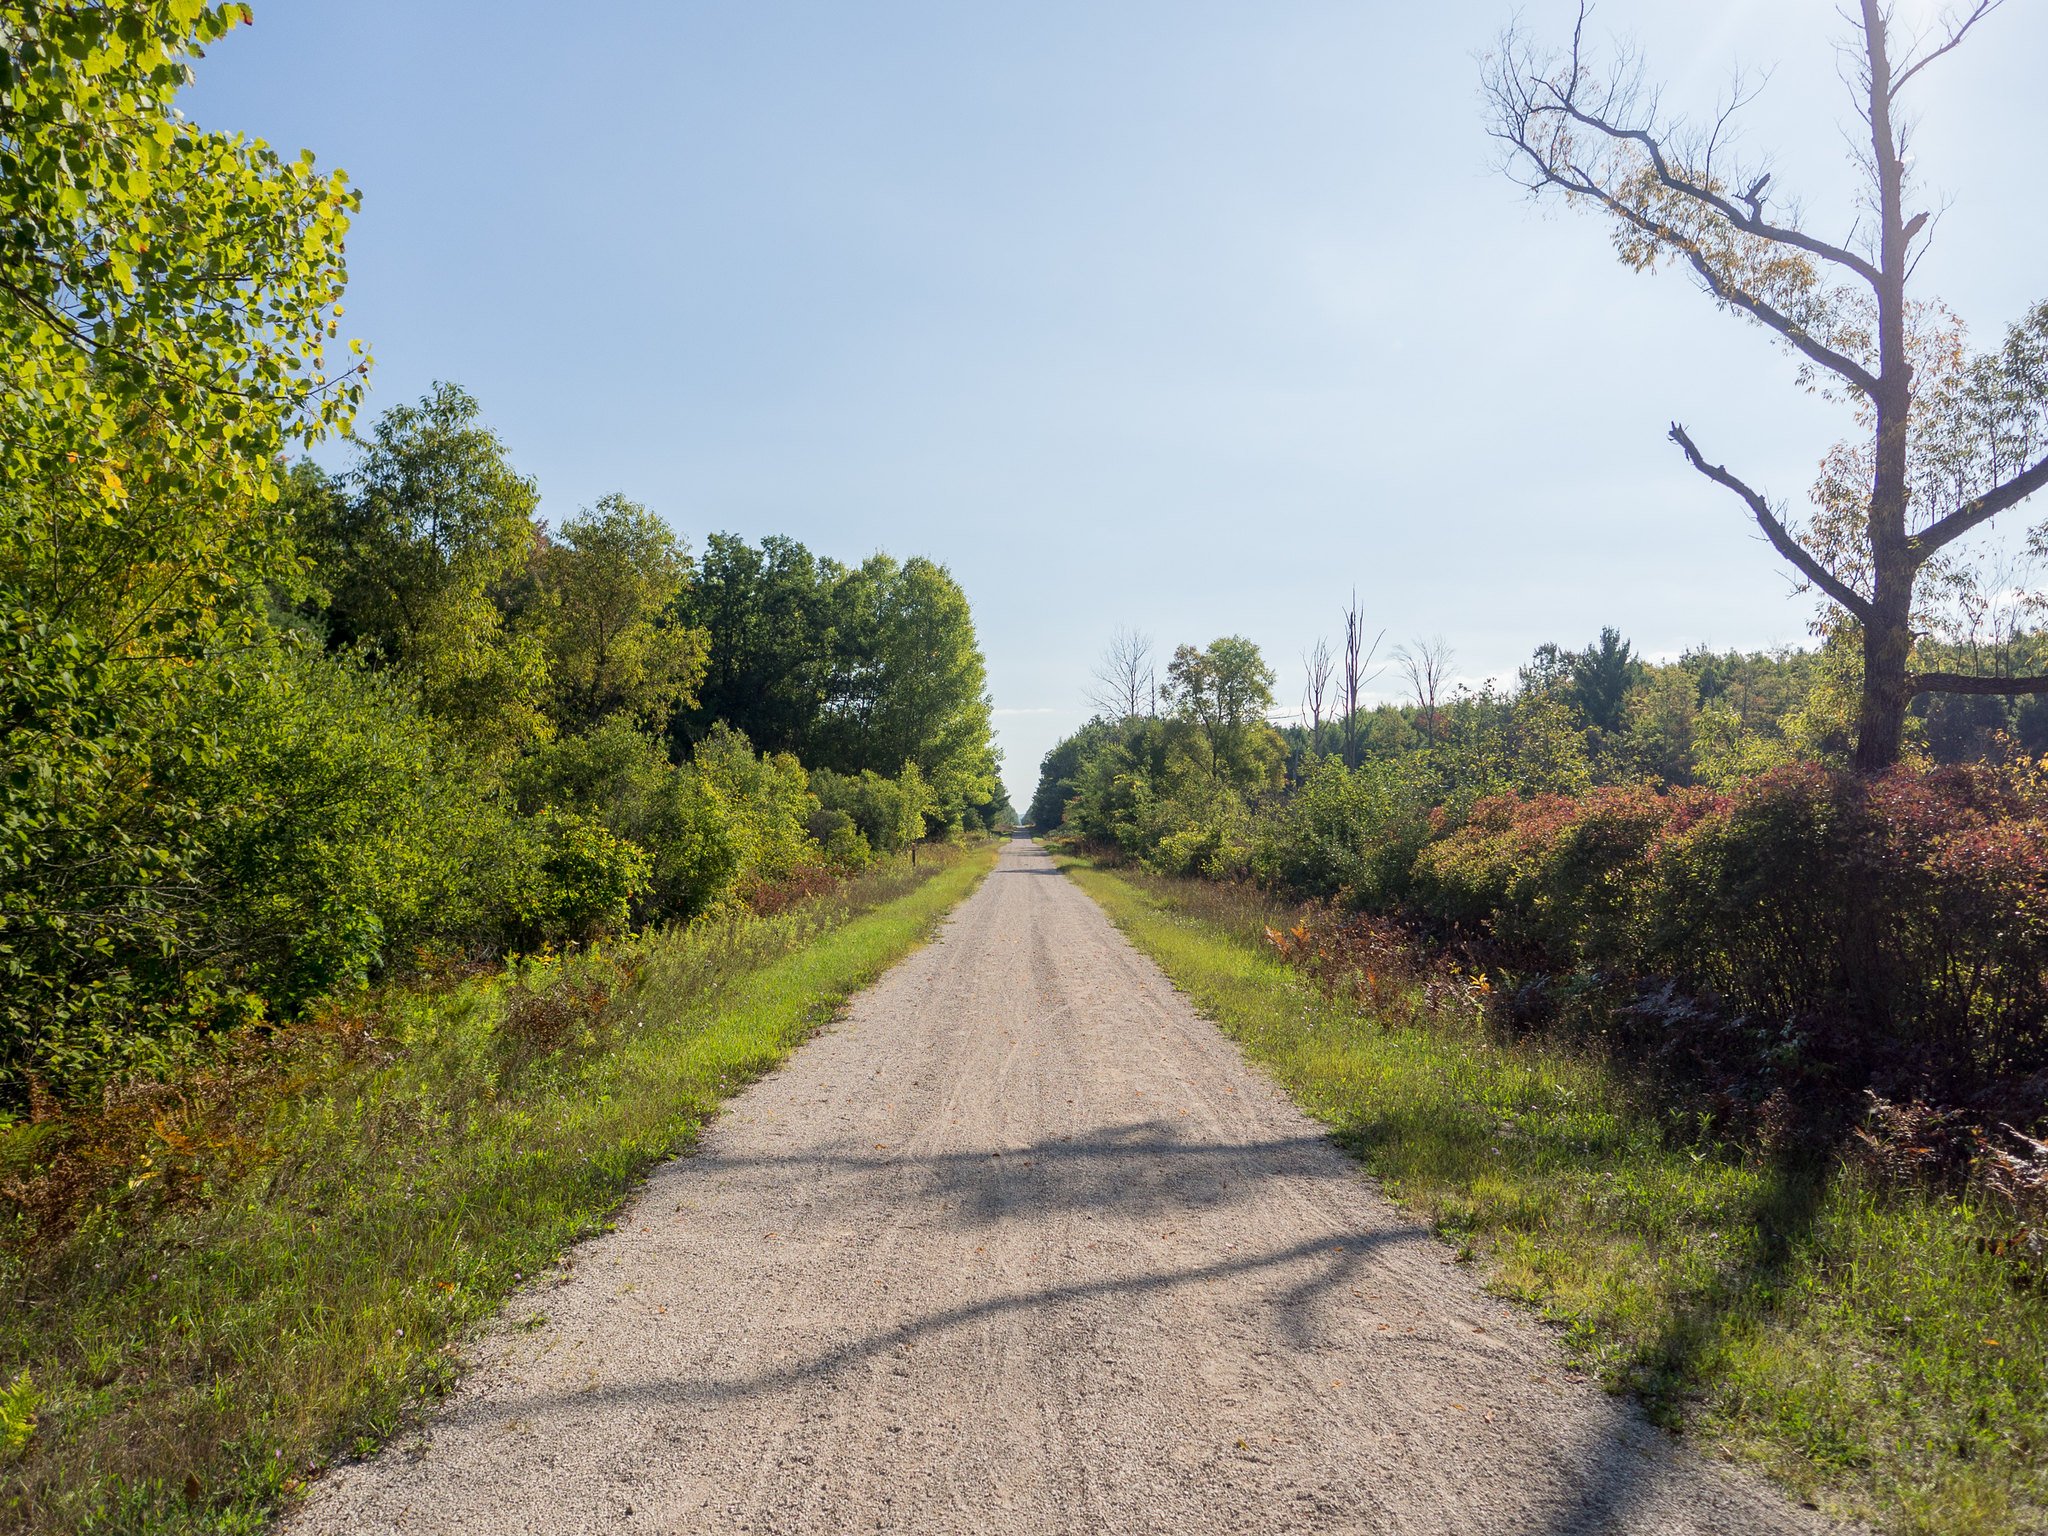 If you can find a good one, gravel trails are the way to go for running.